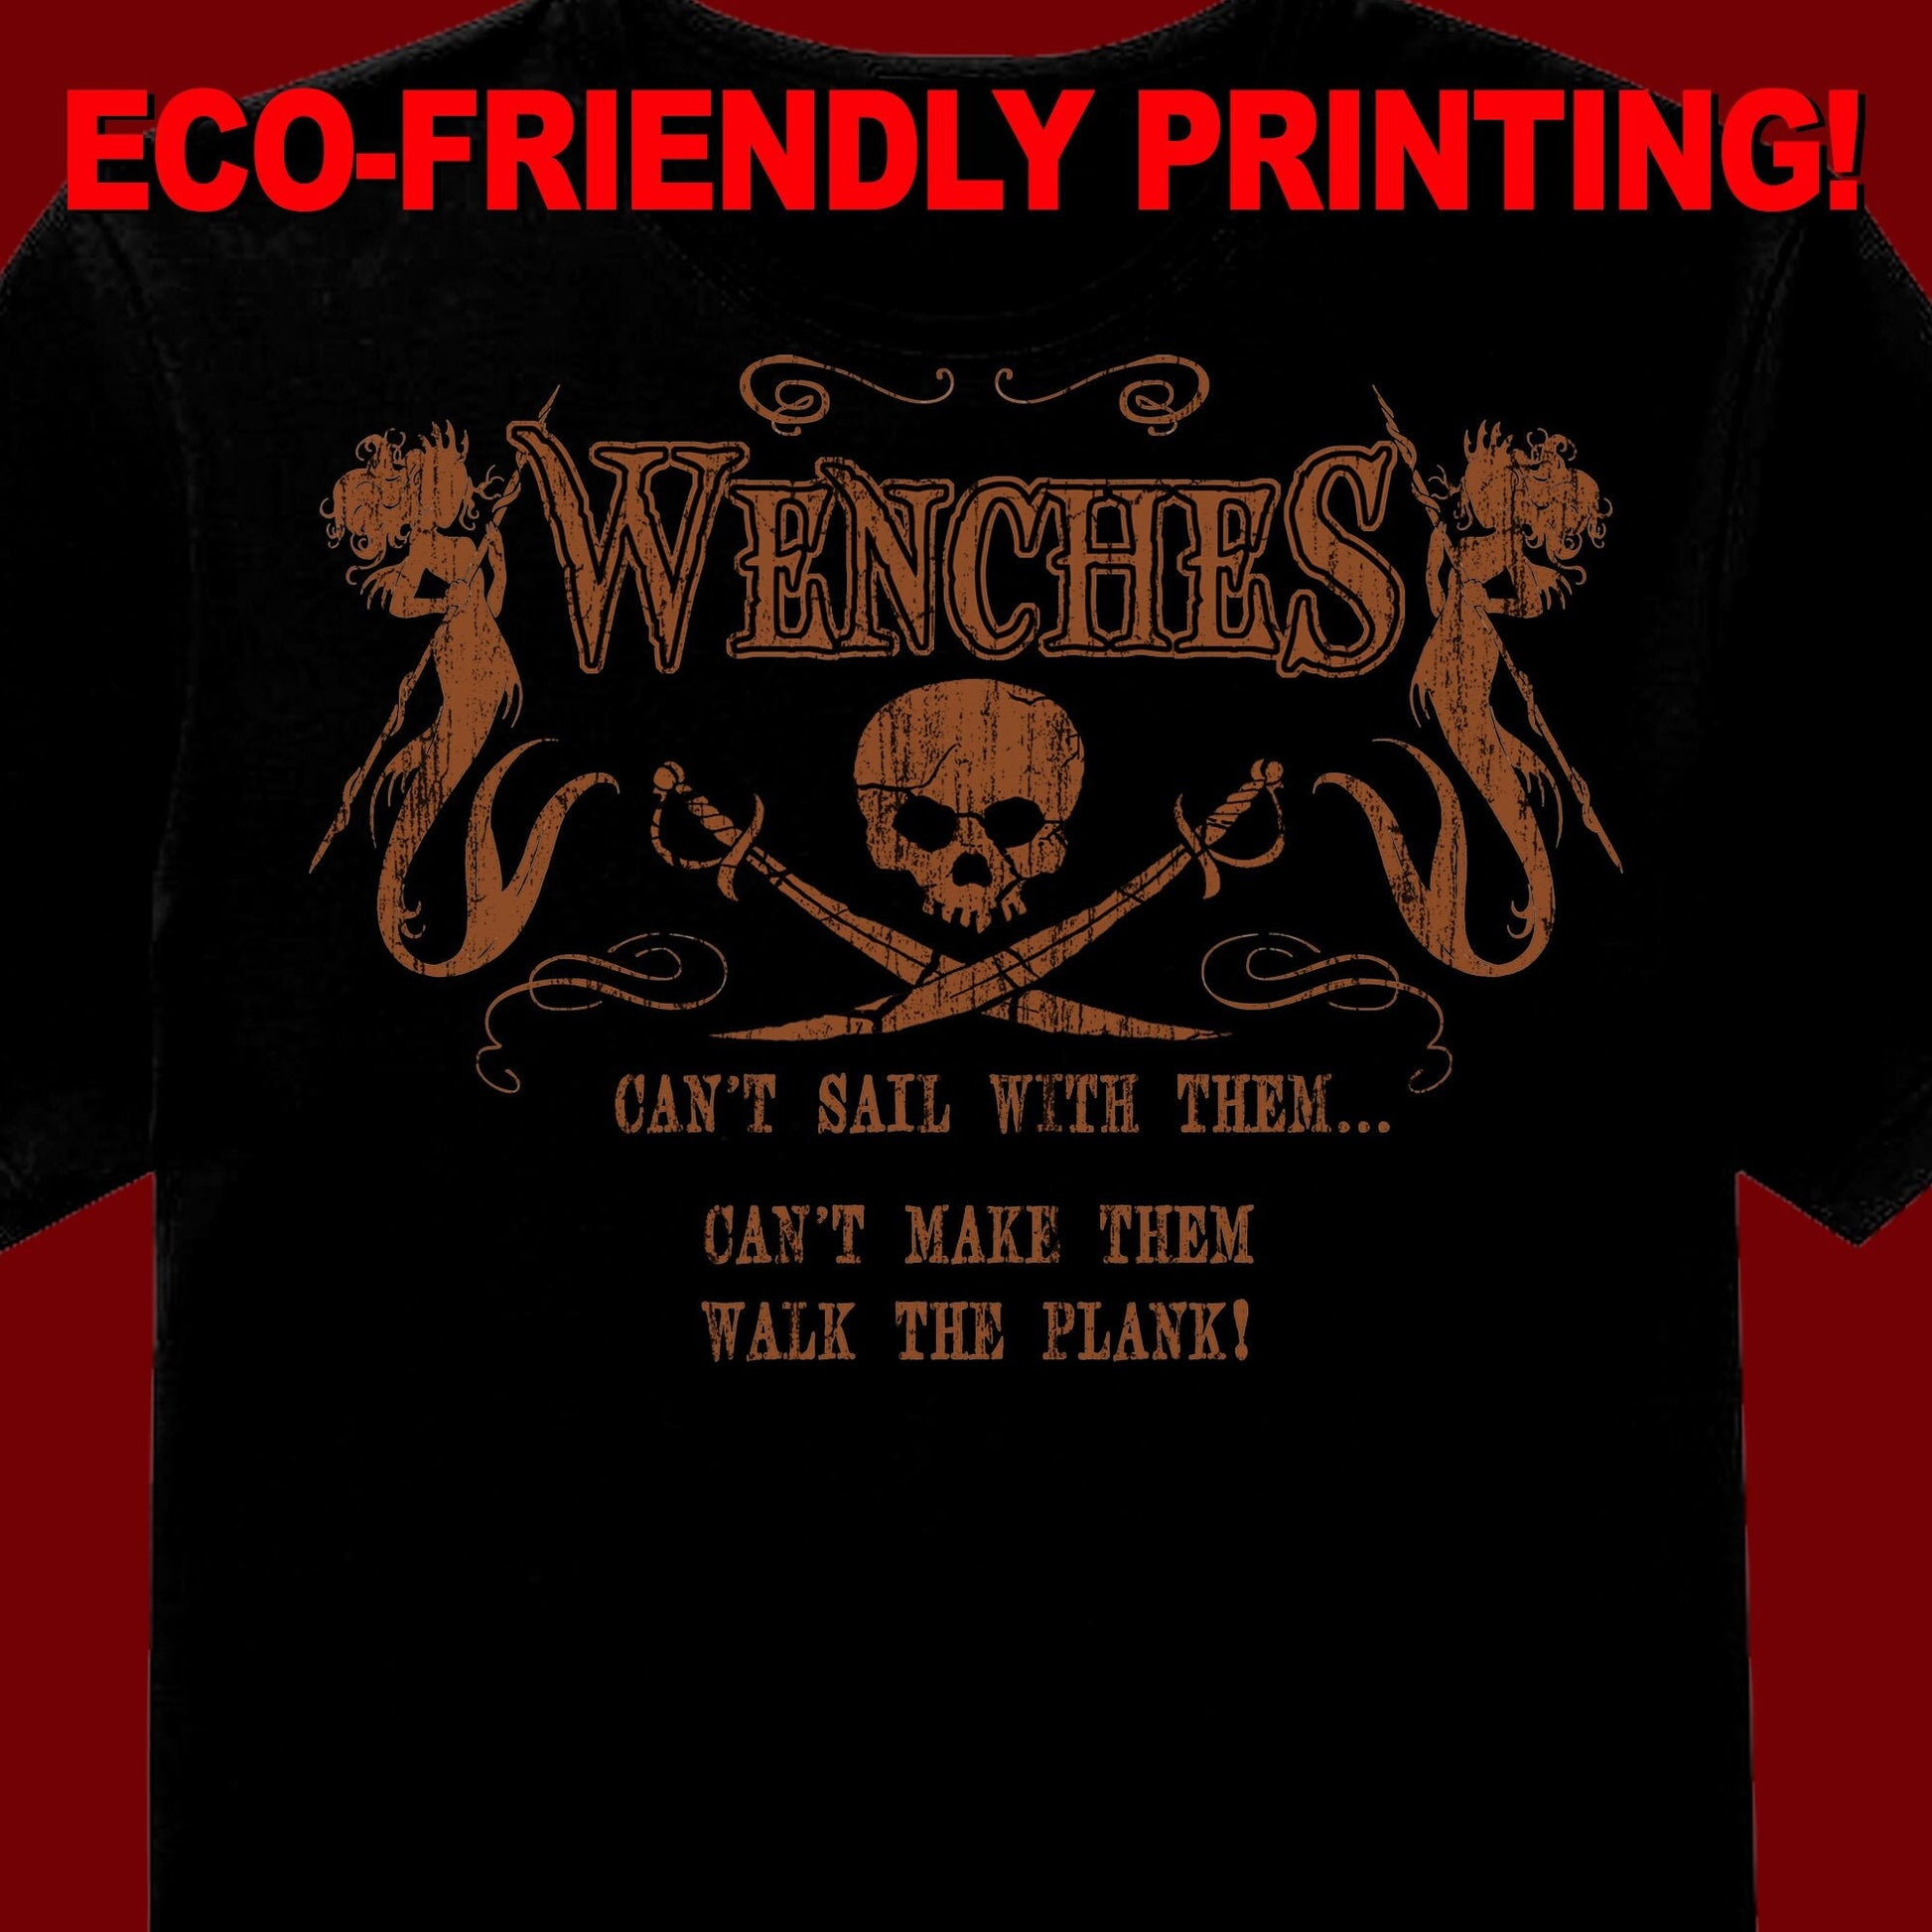 Wenches Can't Sail With Them t-shirt, Pirate tee, Pirate shirt, Pirate gift